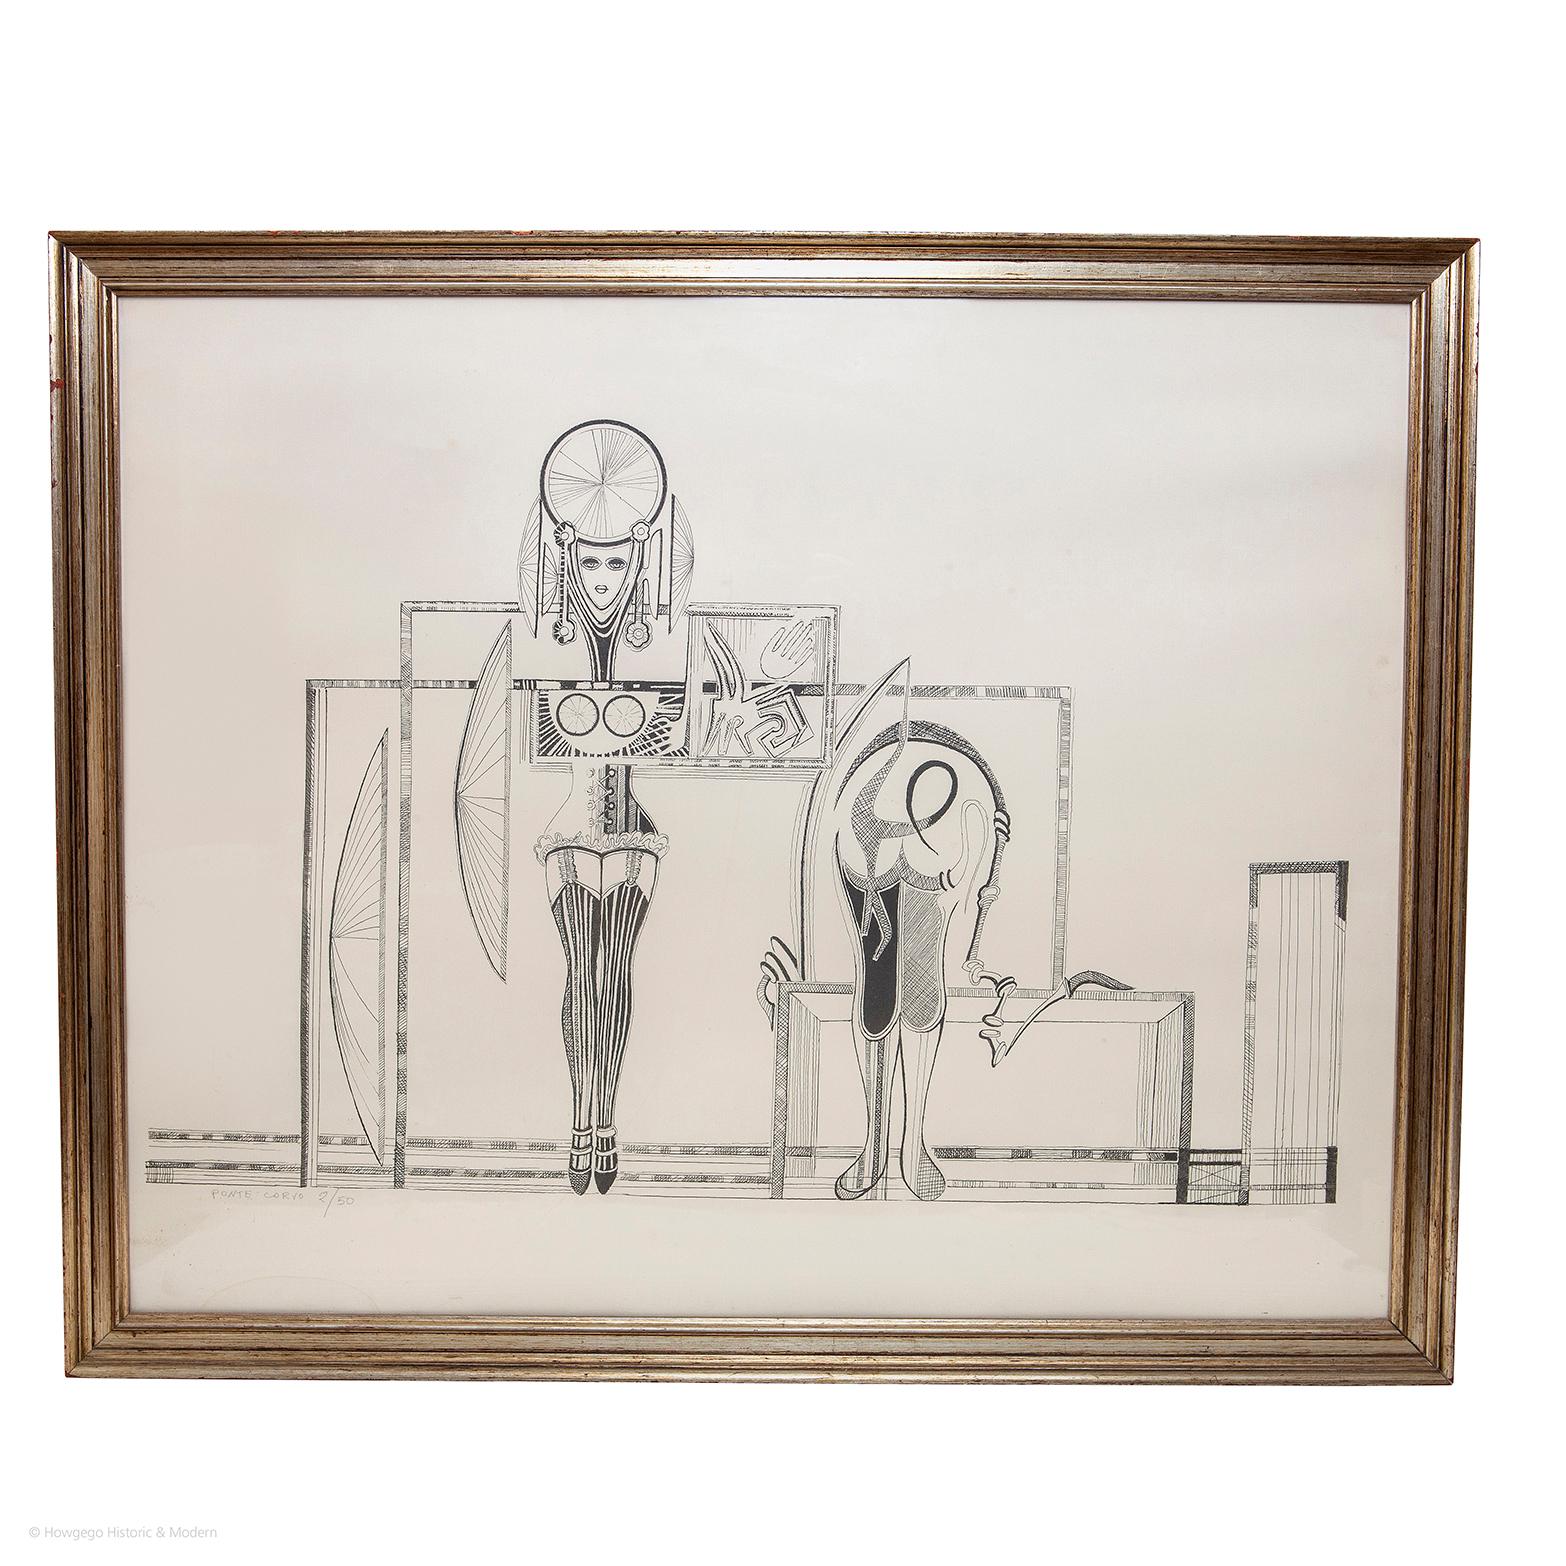 Ponte Corvo, Mid-Century Modern, Monotone, Surrealist print, limited edition 2/50, in the original gilded frame

Playful, erotic, surrealist composition
In Italian Ponte Corvo means literally ‘bridge’ ponte and ‘curved’ curvo. 
The composition